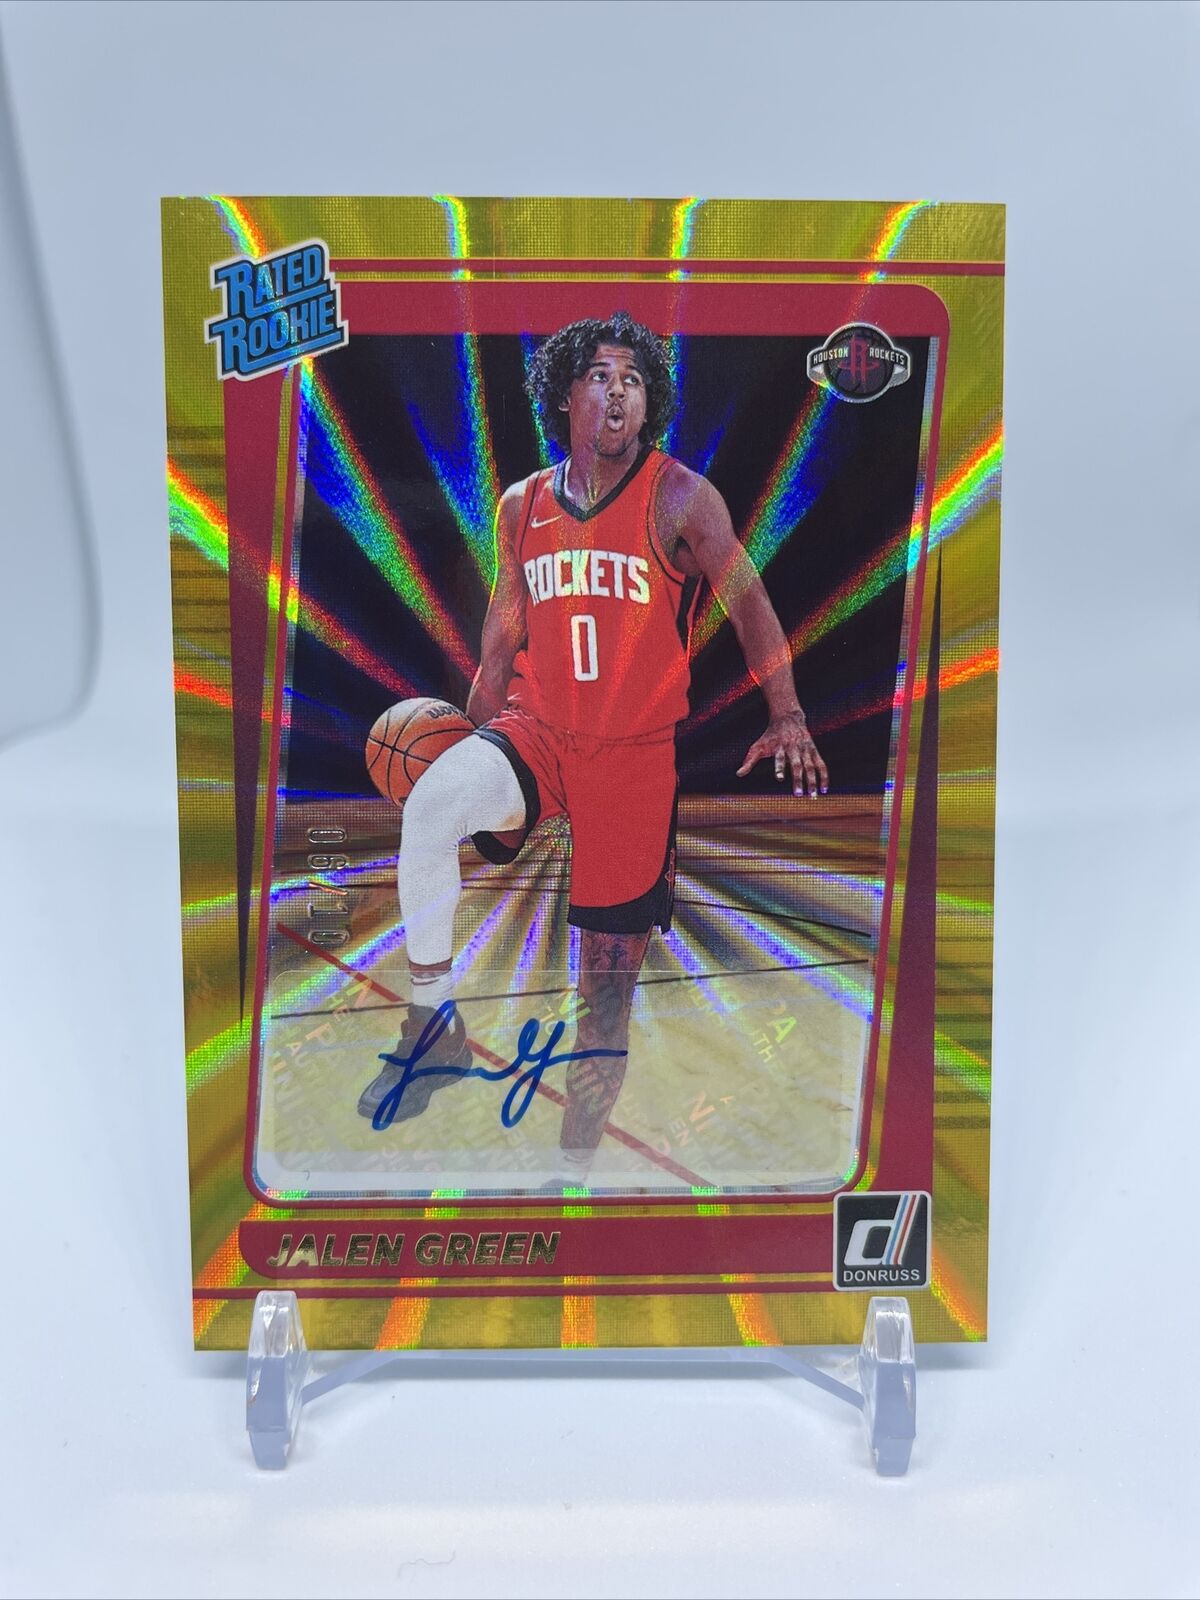 Image 1 - 2021-22 Donruss JALEN GREEN Rated Rookie Holo Gold #/10 Auto Houston Rockets WOW